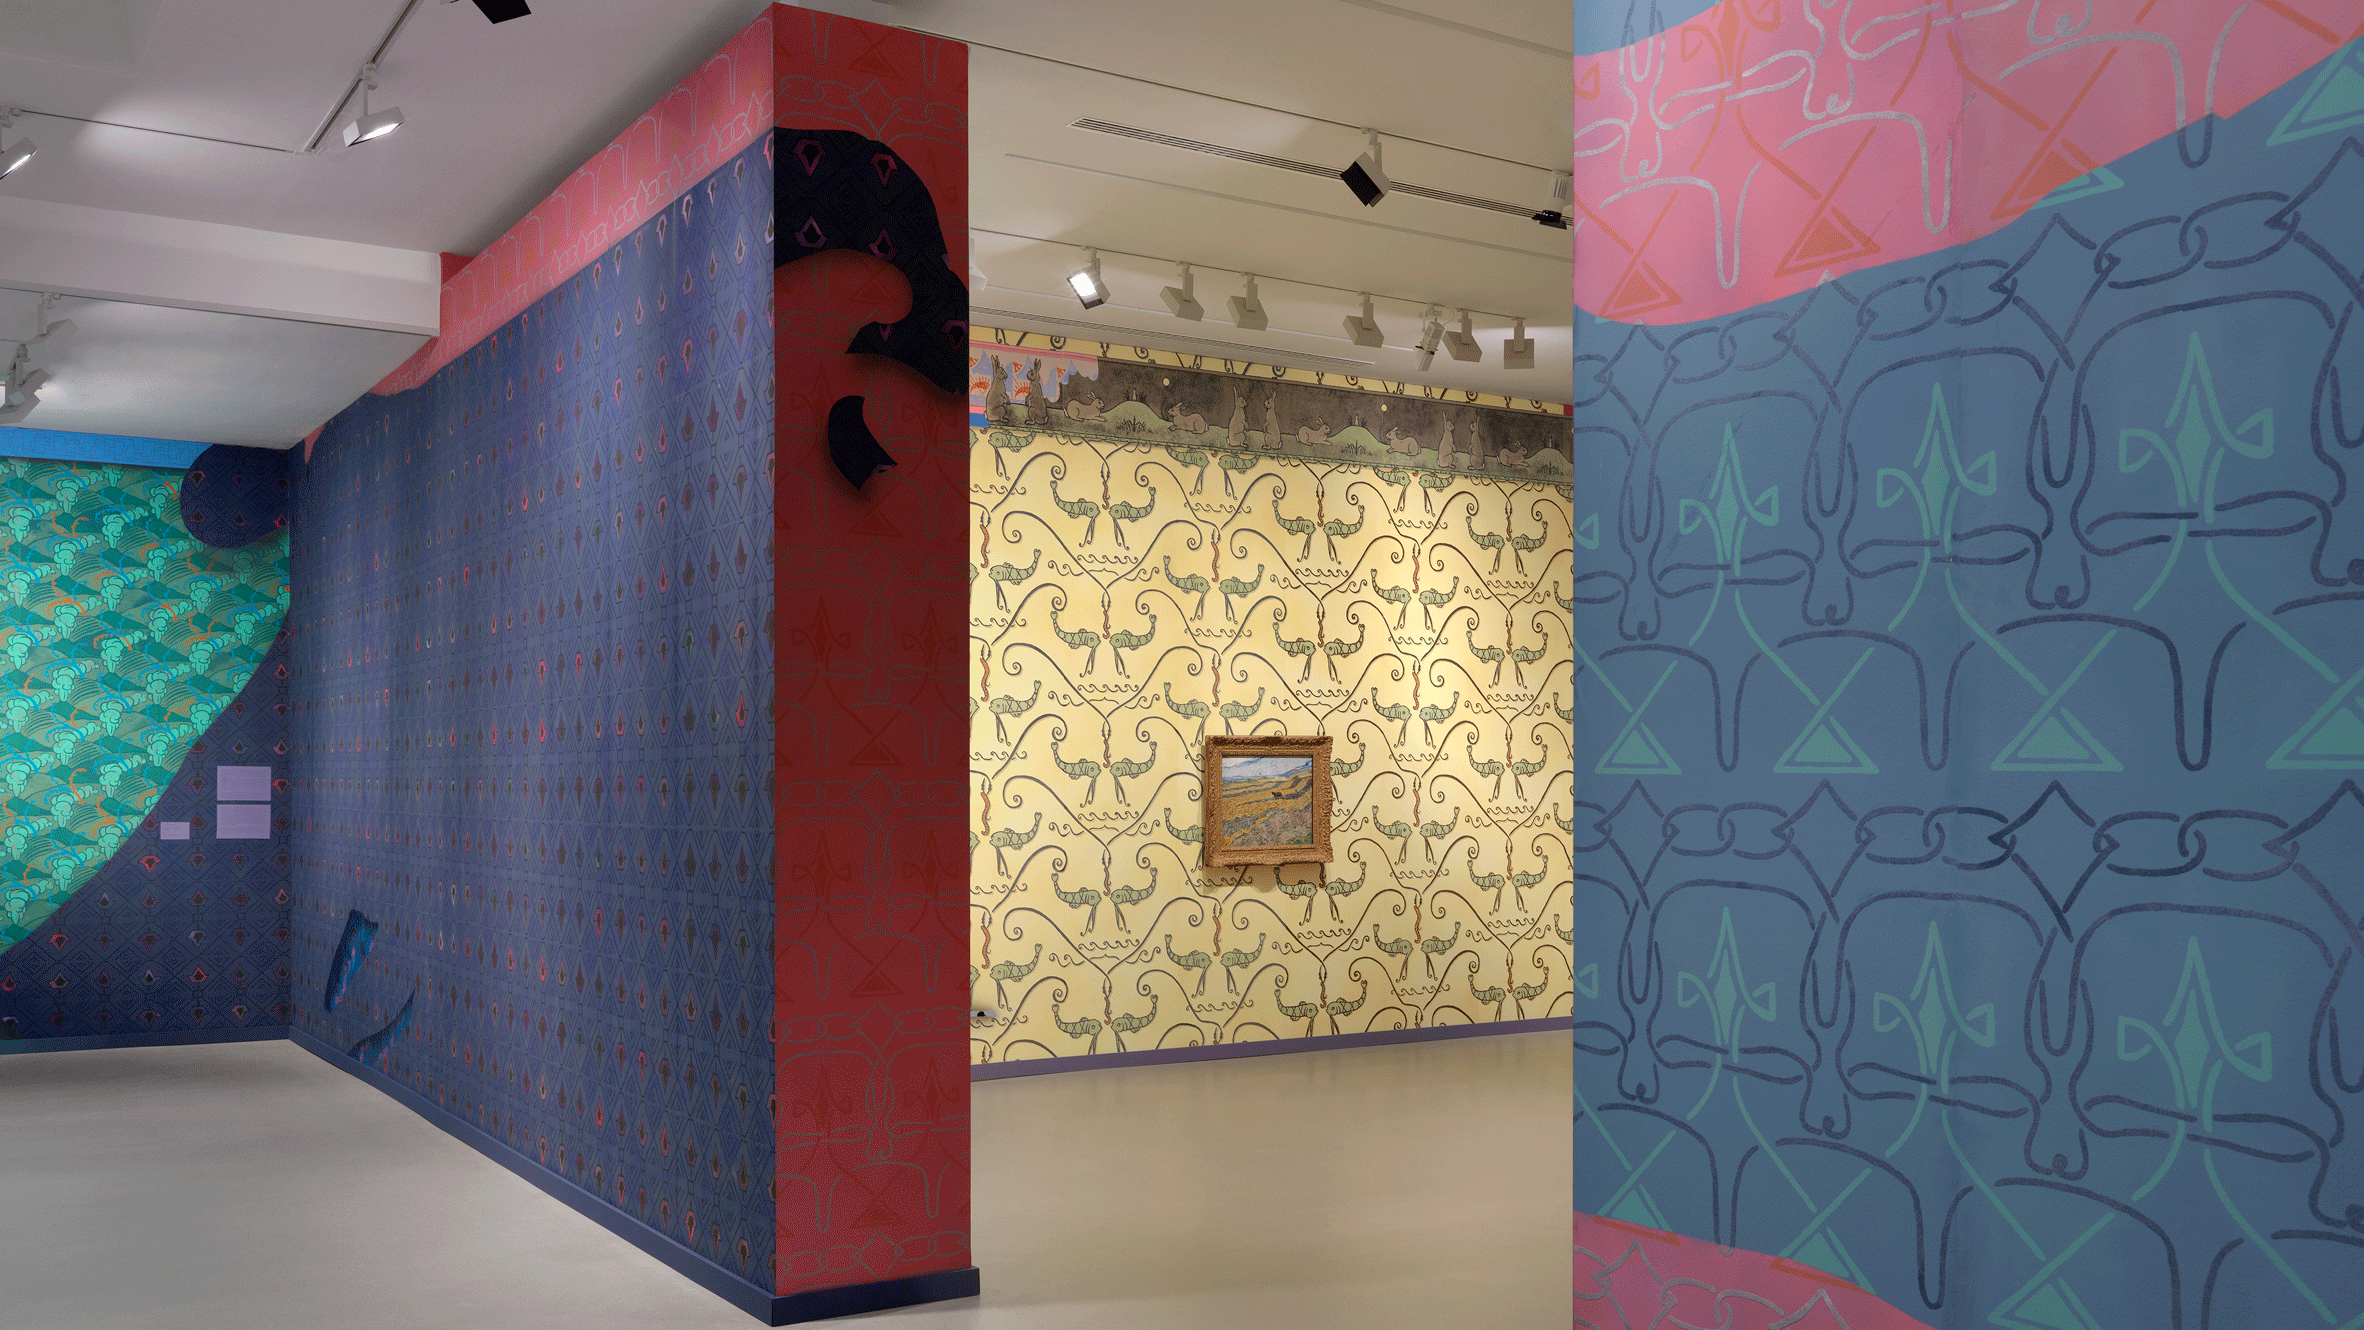 Colourful patterned wallpaper at the Laura Owens and Vincent van Gogh exhibition